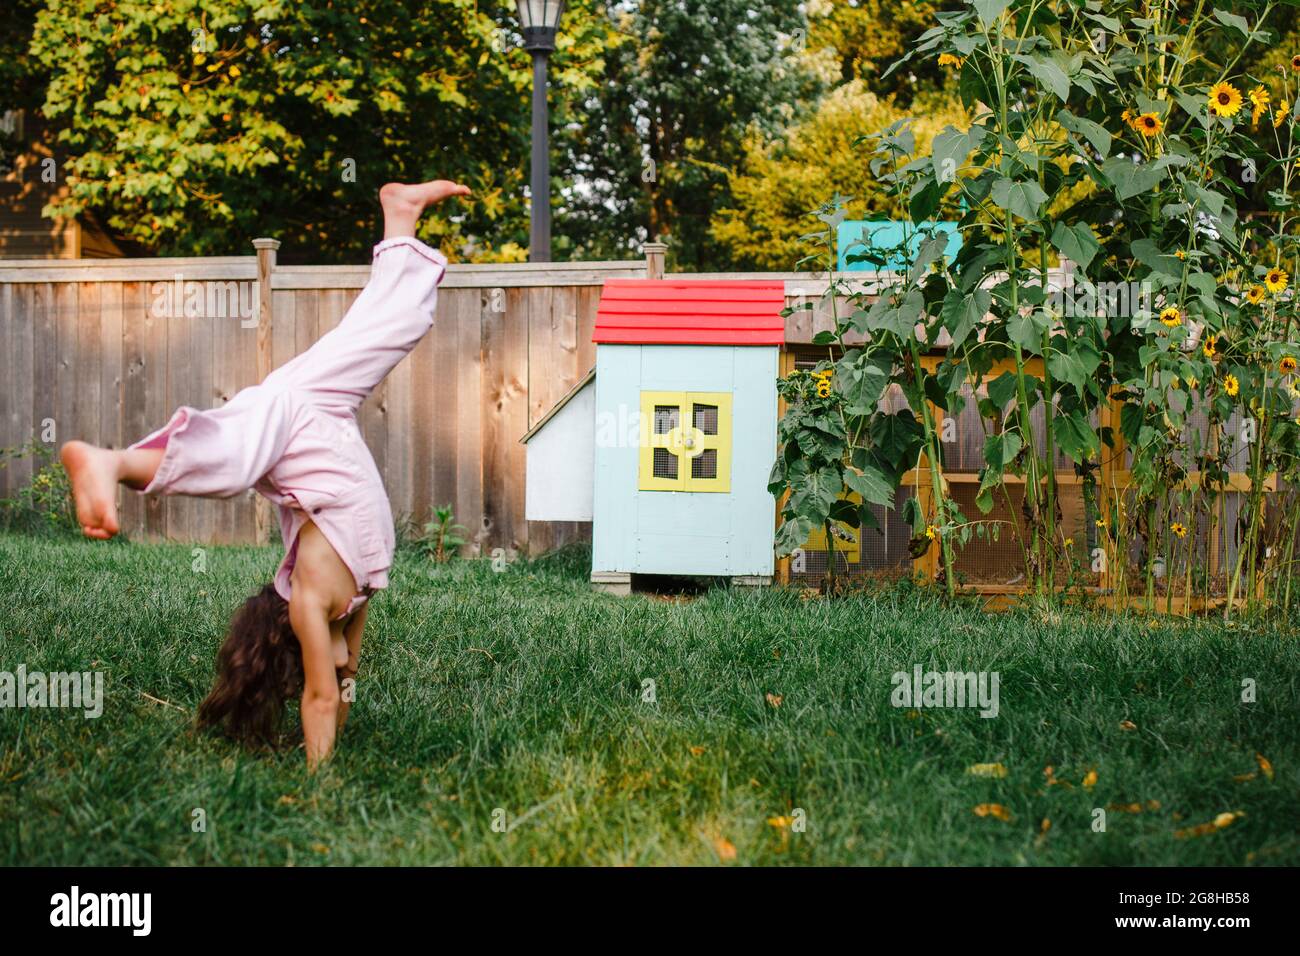 A little girl cartwheels in backyard by colorful chicken coop Stock Photo